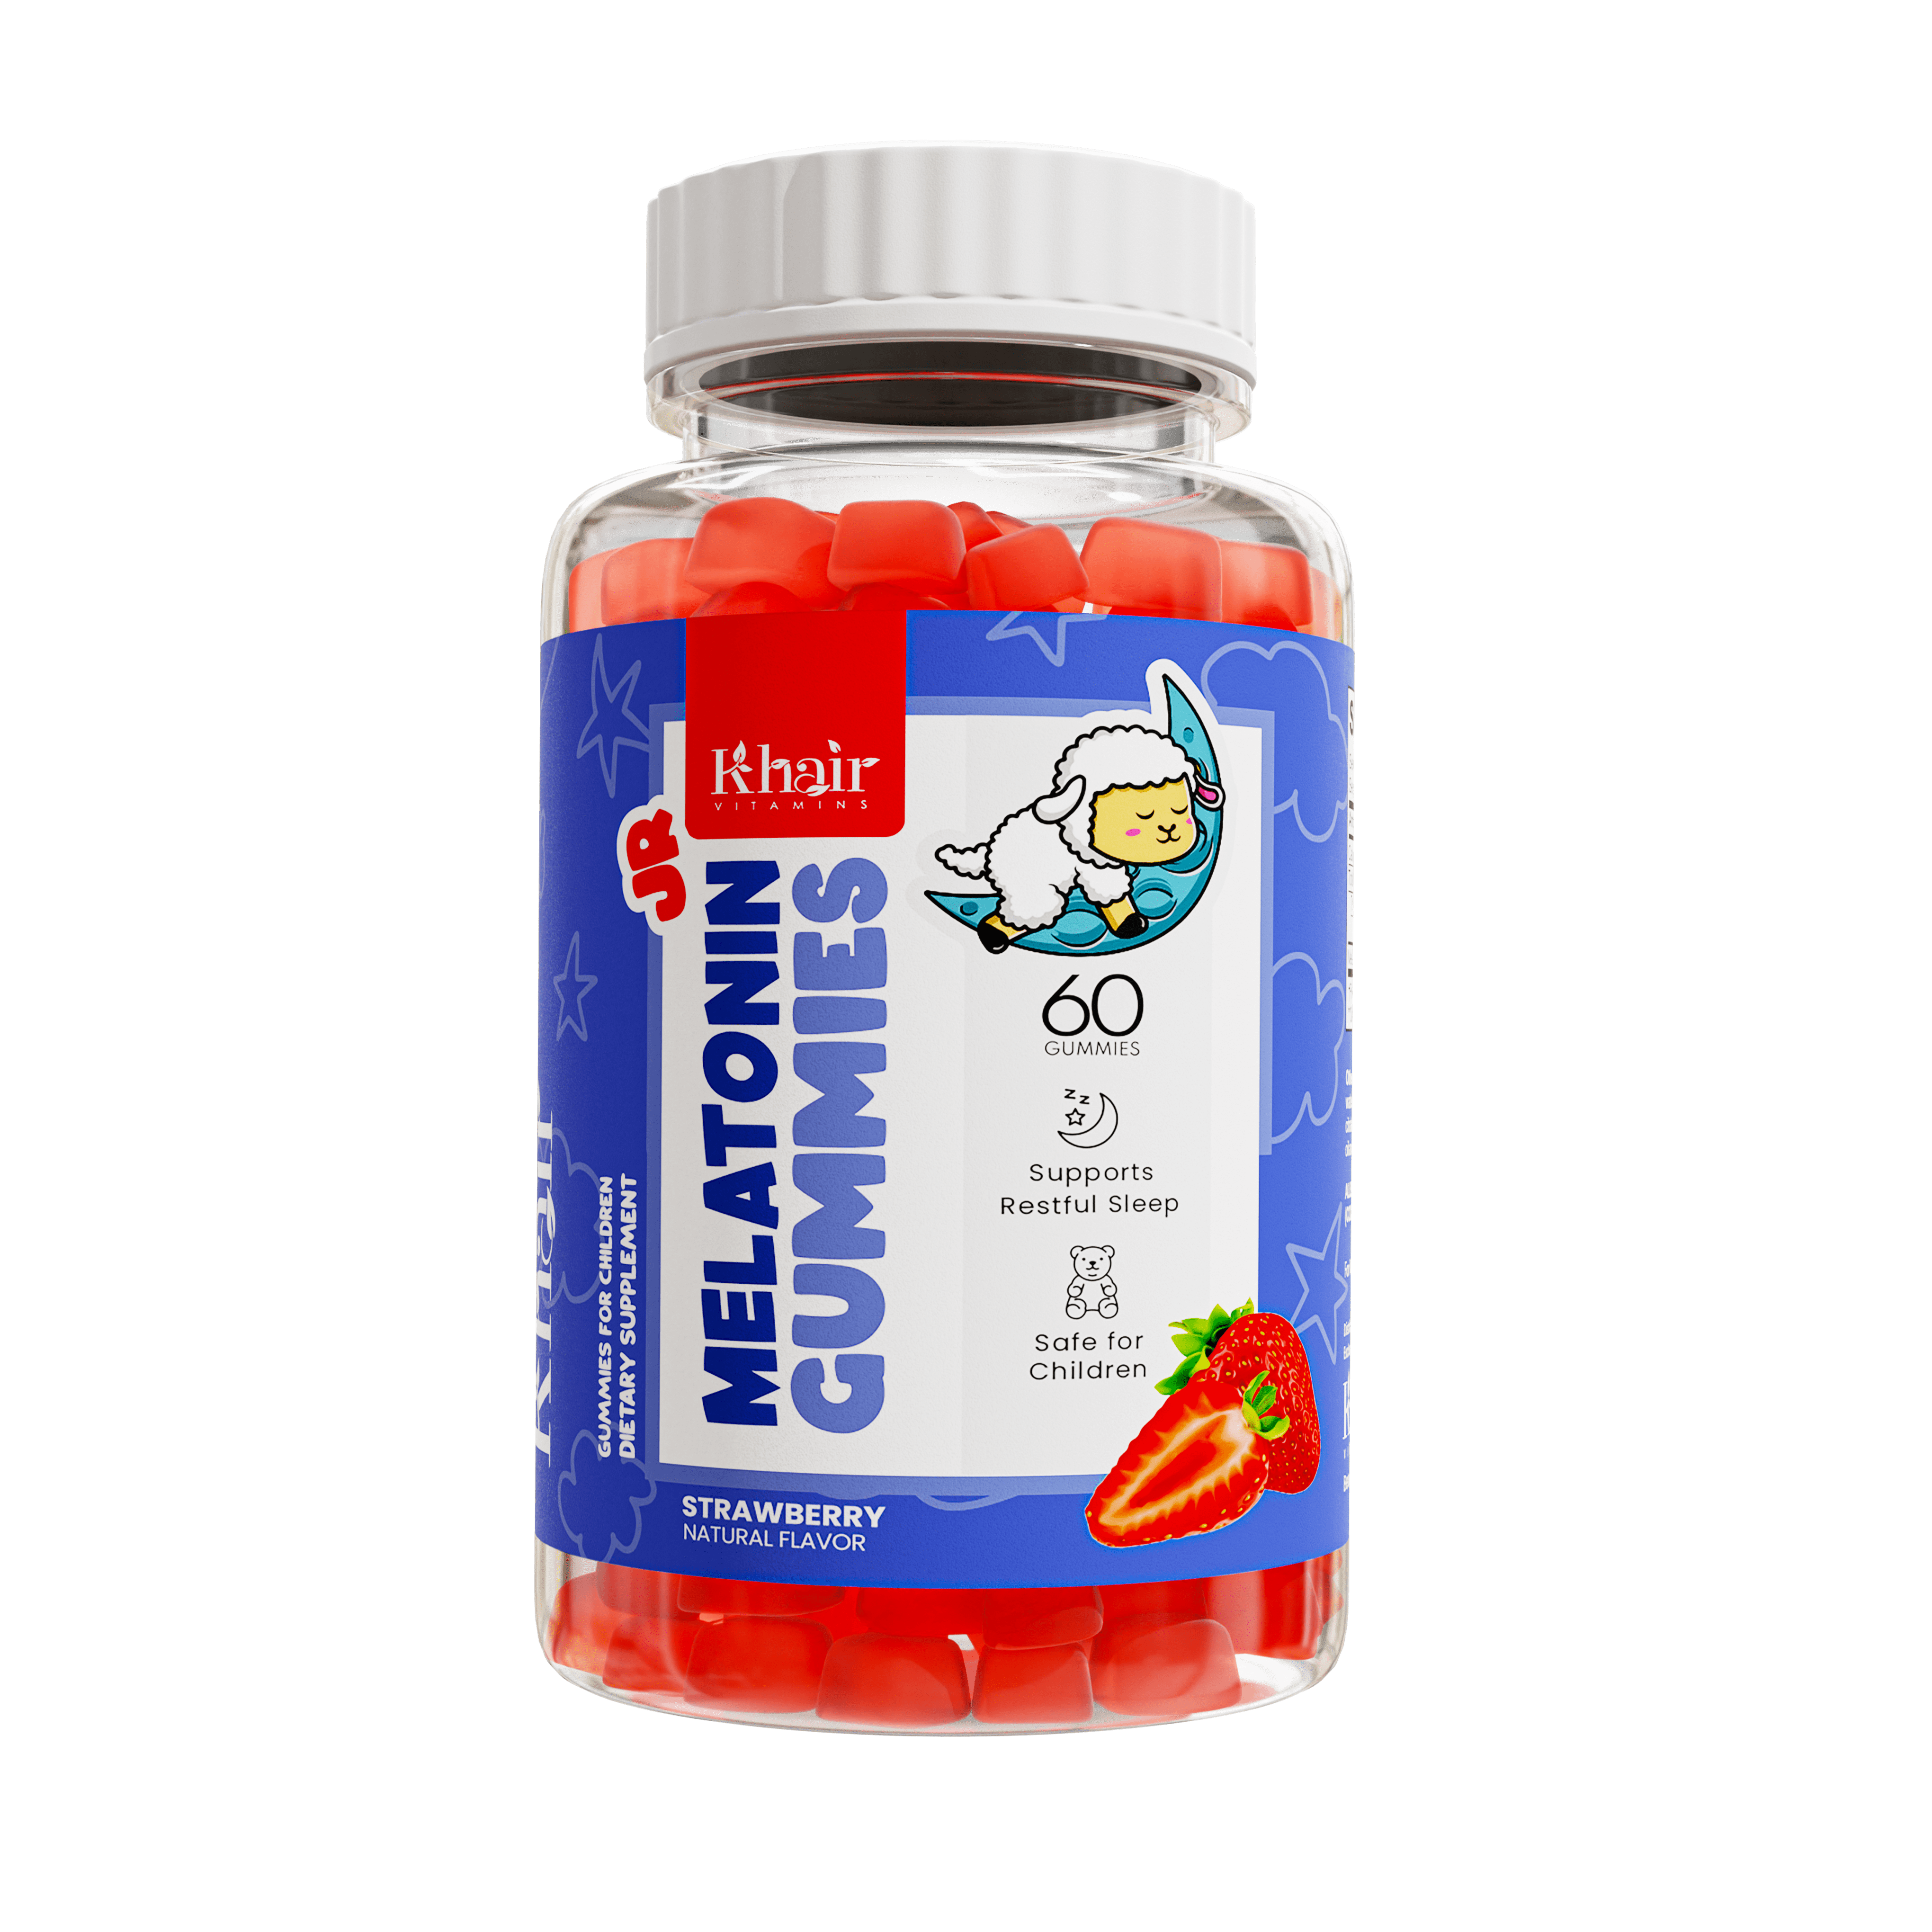 A bottle of Khair Super JR Gummies for kids, featuring multivitamins in cherry, strawberry, and orange flavors, labeled as gluten-free with a quantity of 60 gummies.